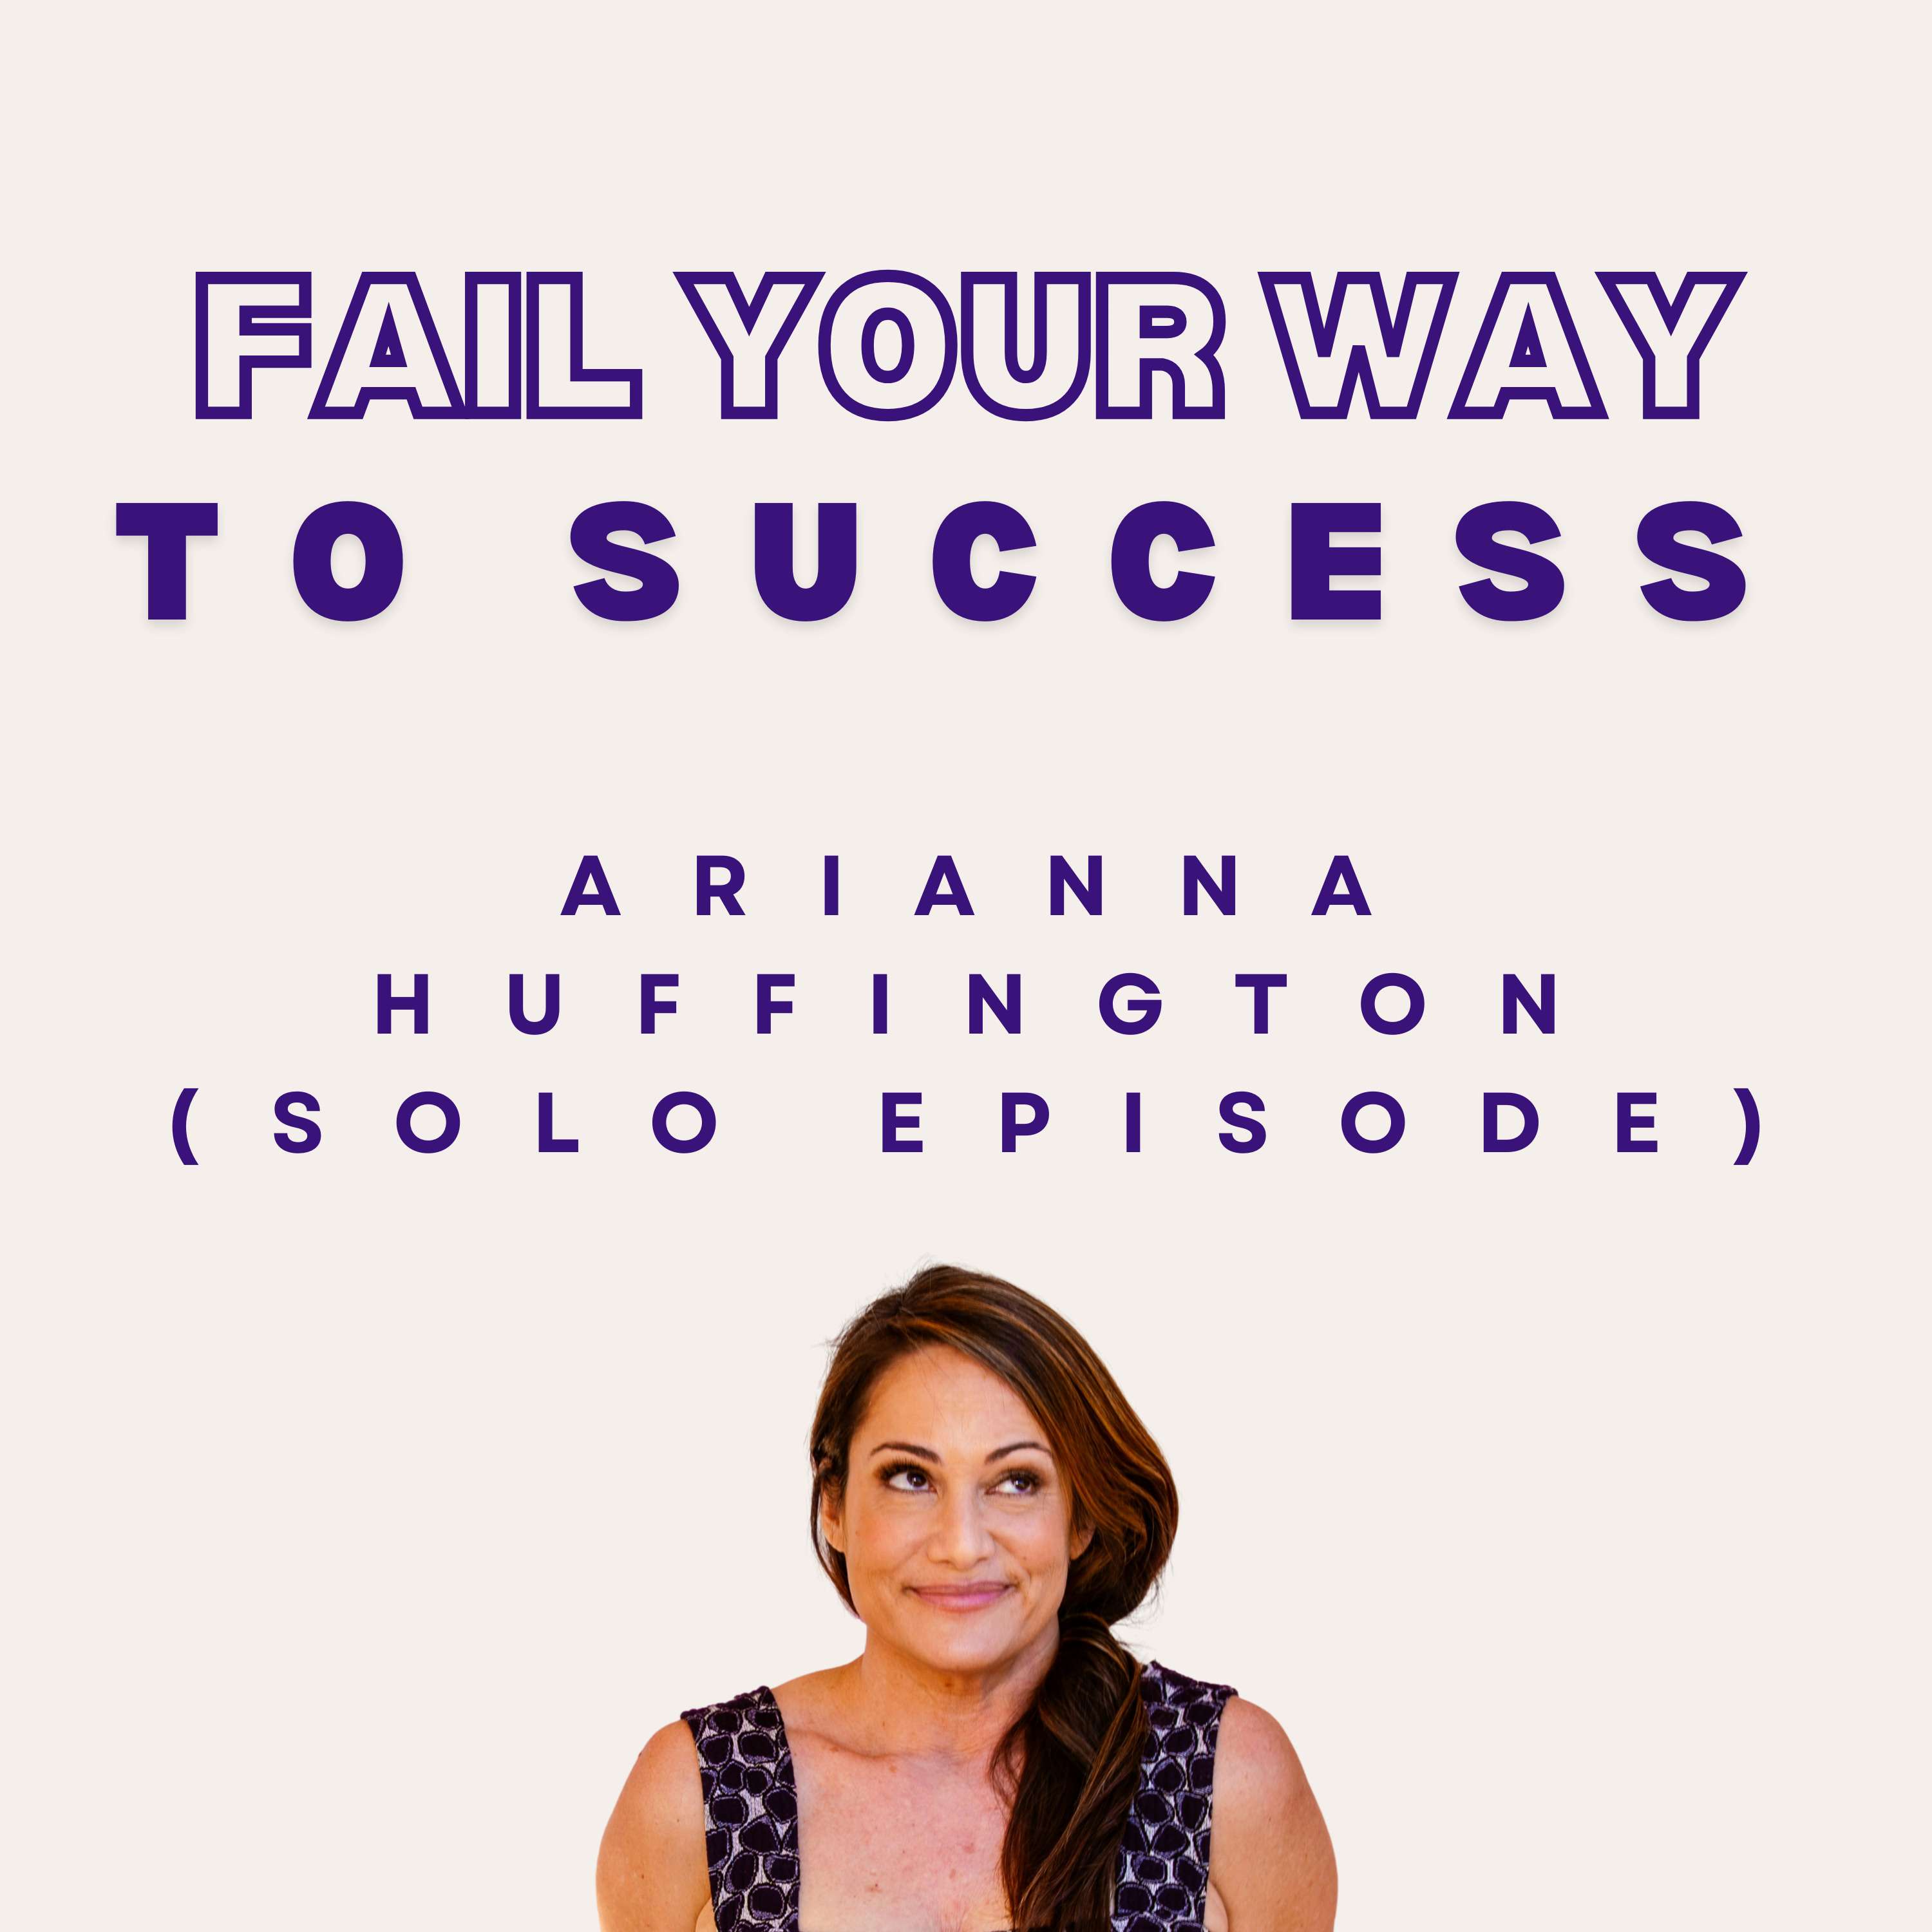 9. How Arianna Huffington Got Rejected 37 Times (Solo Episode)